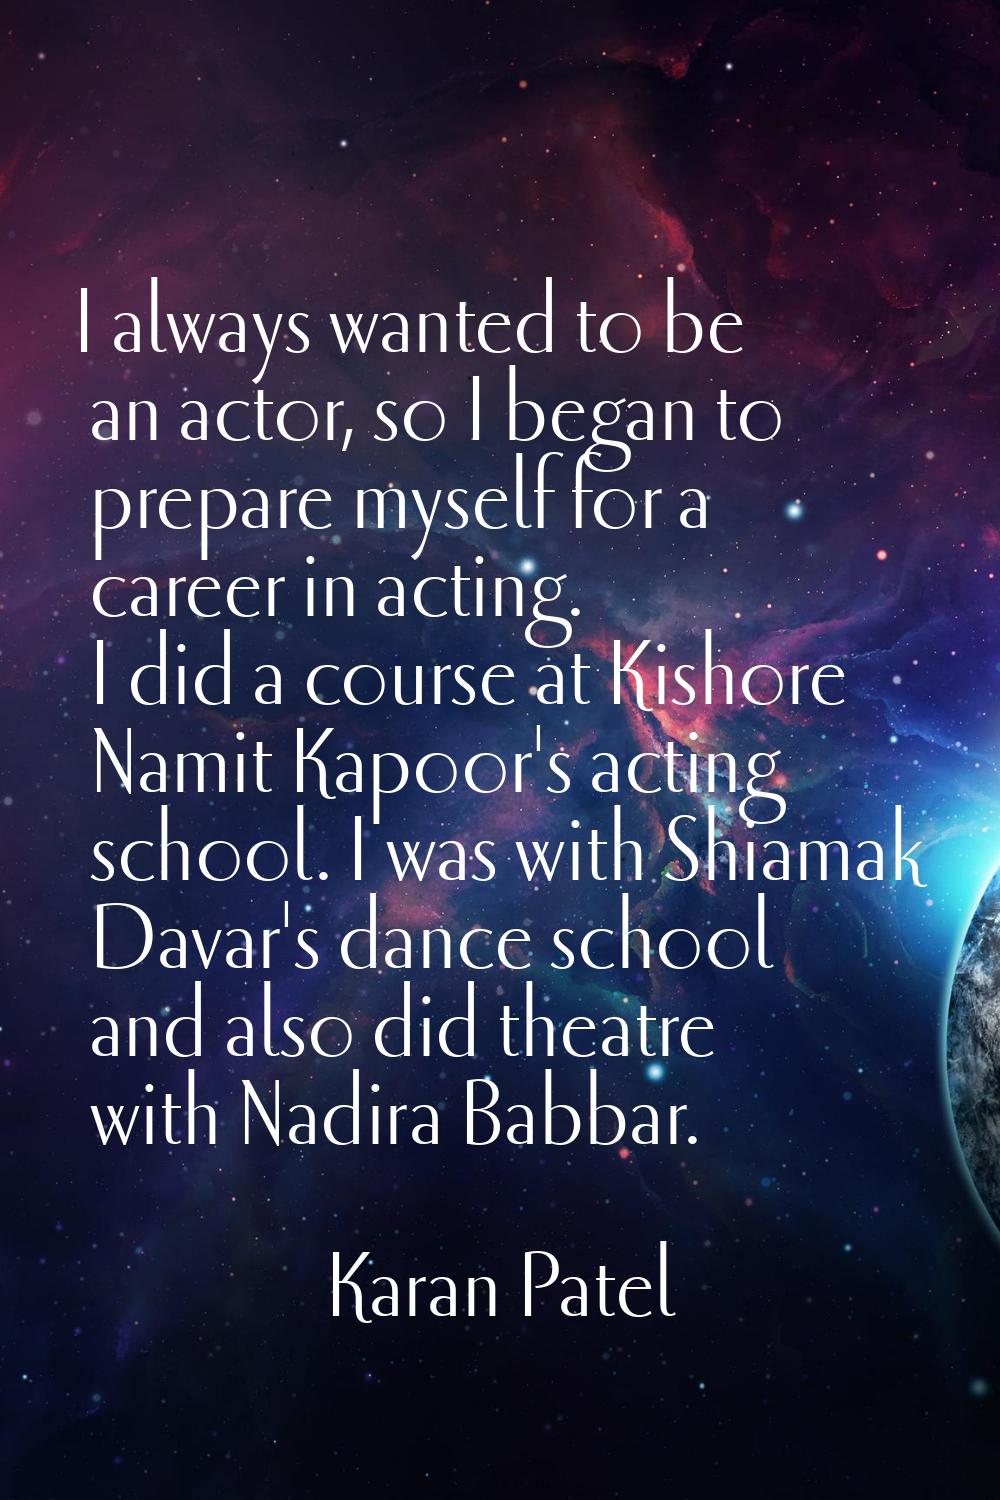 I always wanted to be an actor, so I began to prepare myself for a career in acting. I did a course